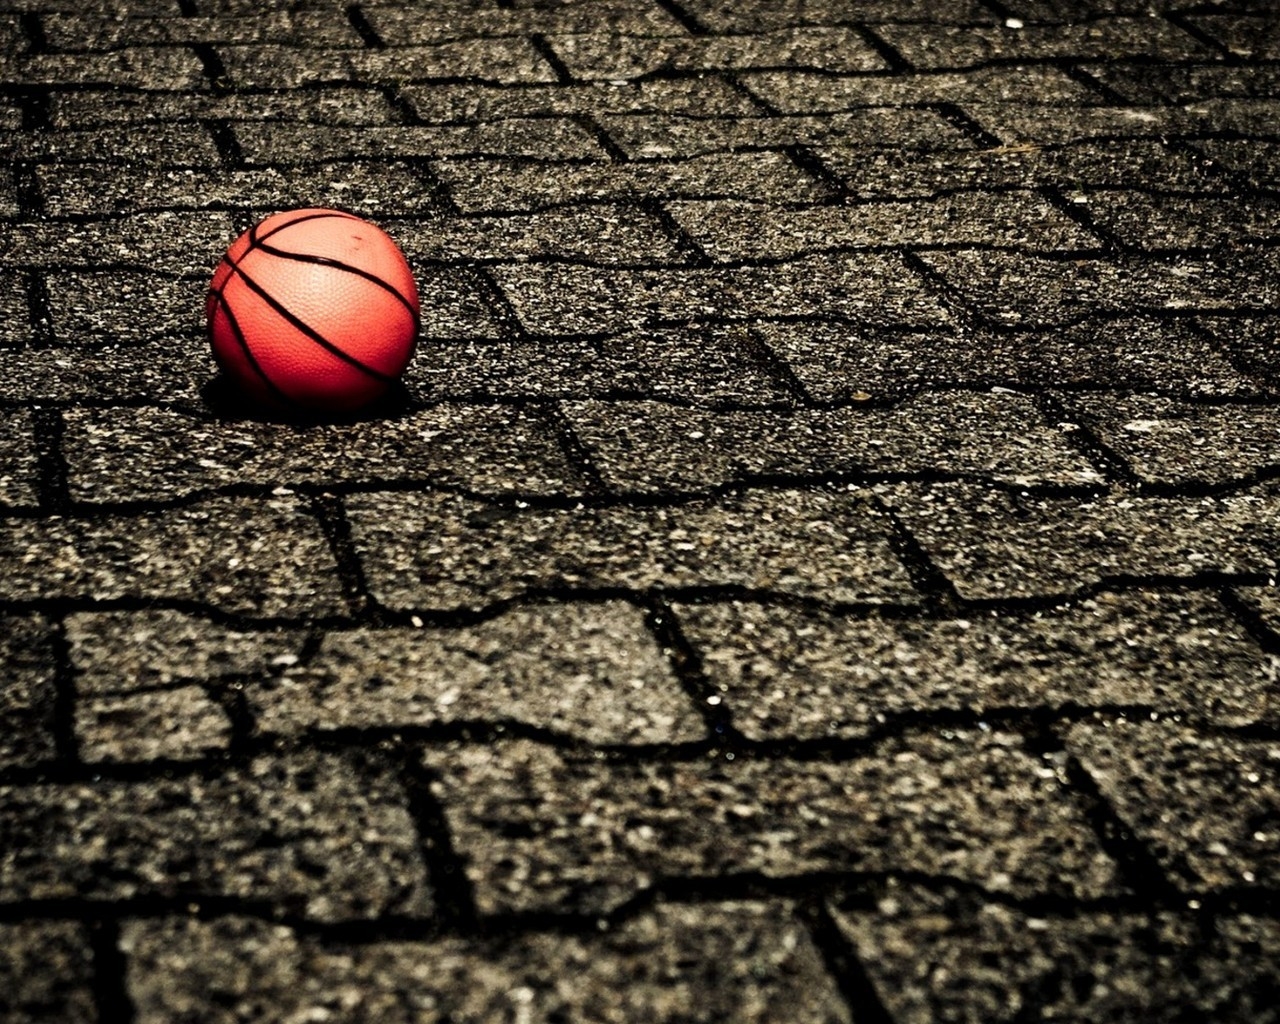 Ball on The Street for 1280 x 1024 resolution